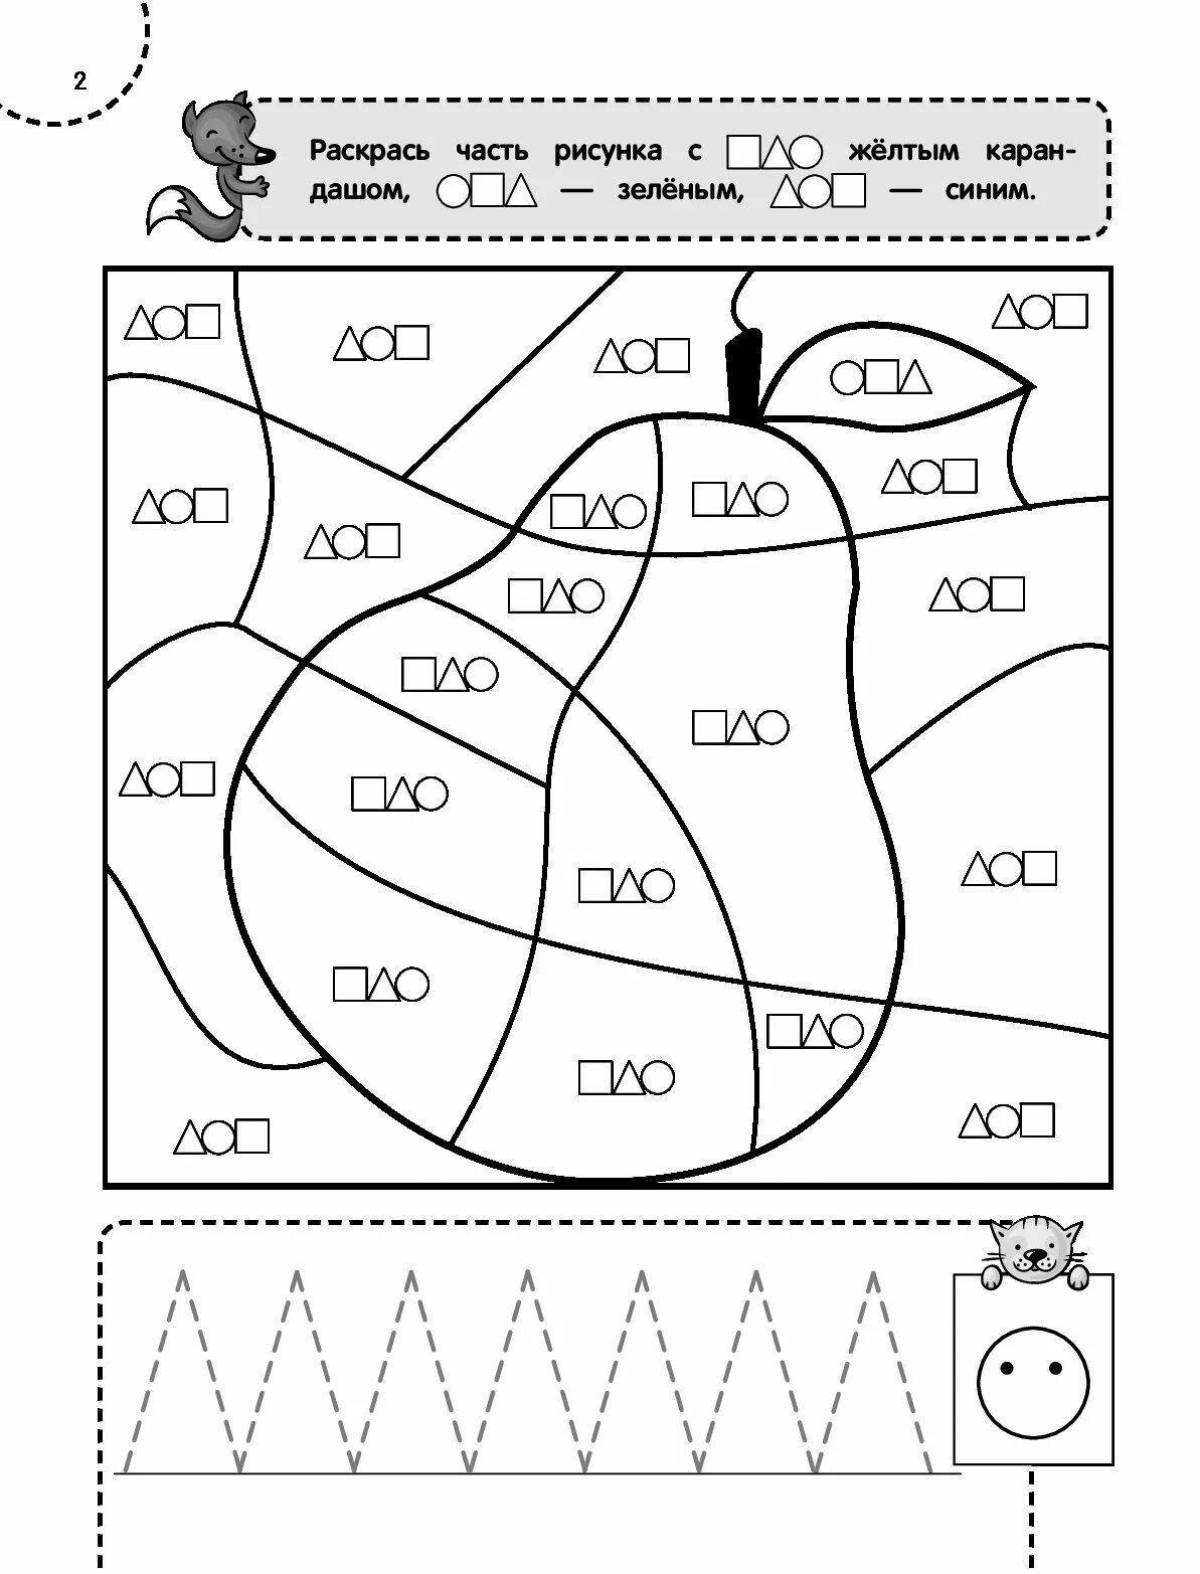 Attractive training equipment coloring page